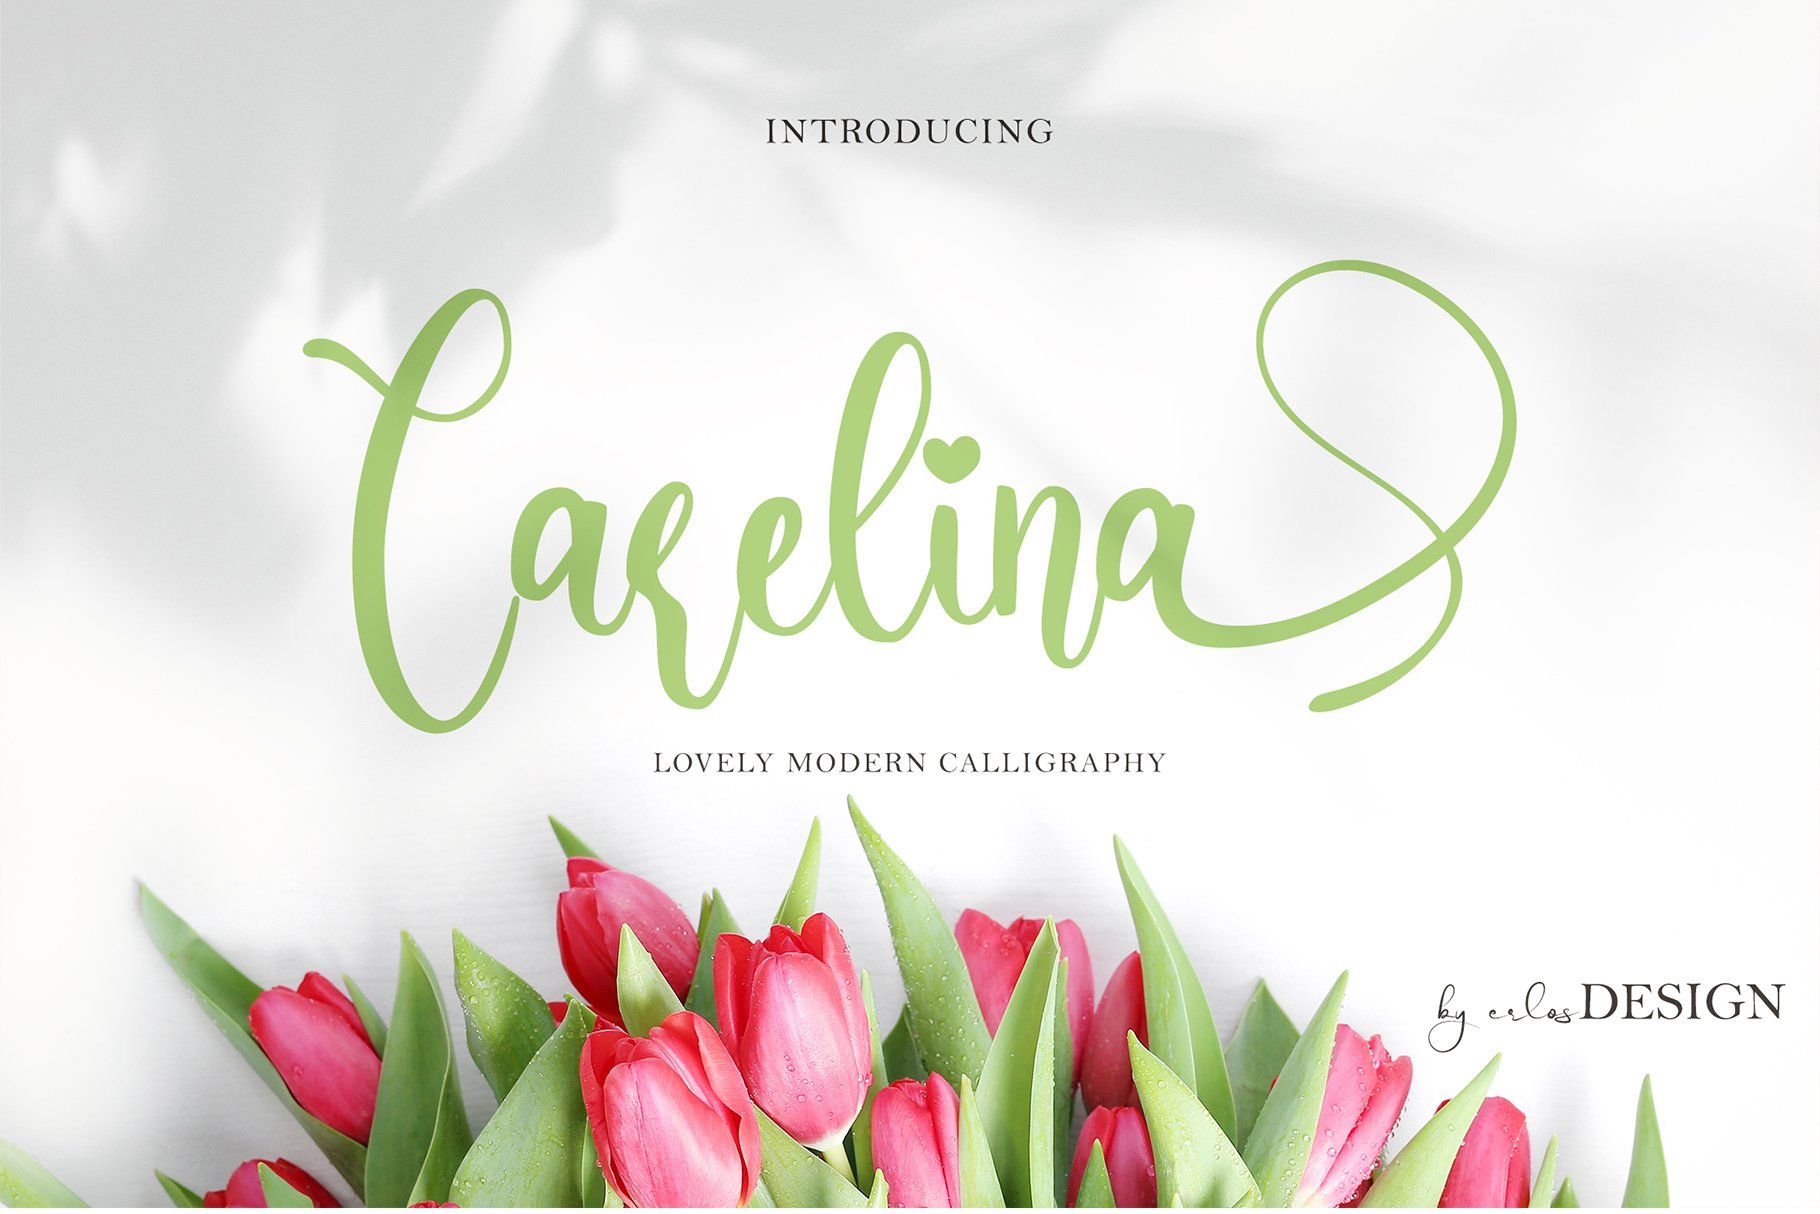 A lovely modern calligraphy font